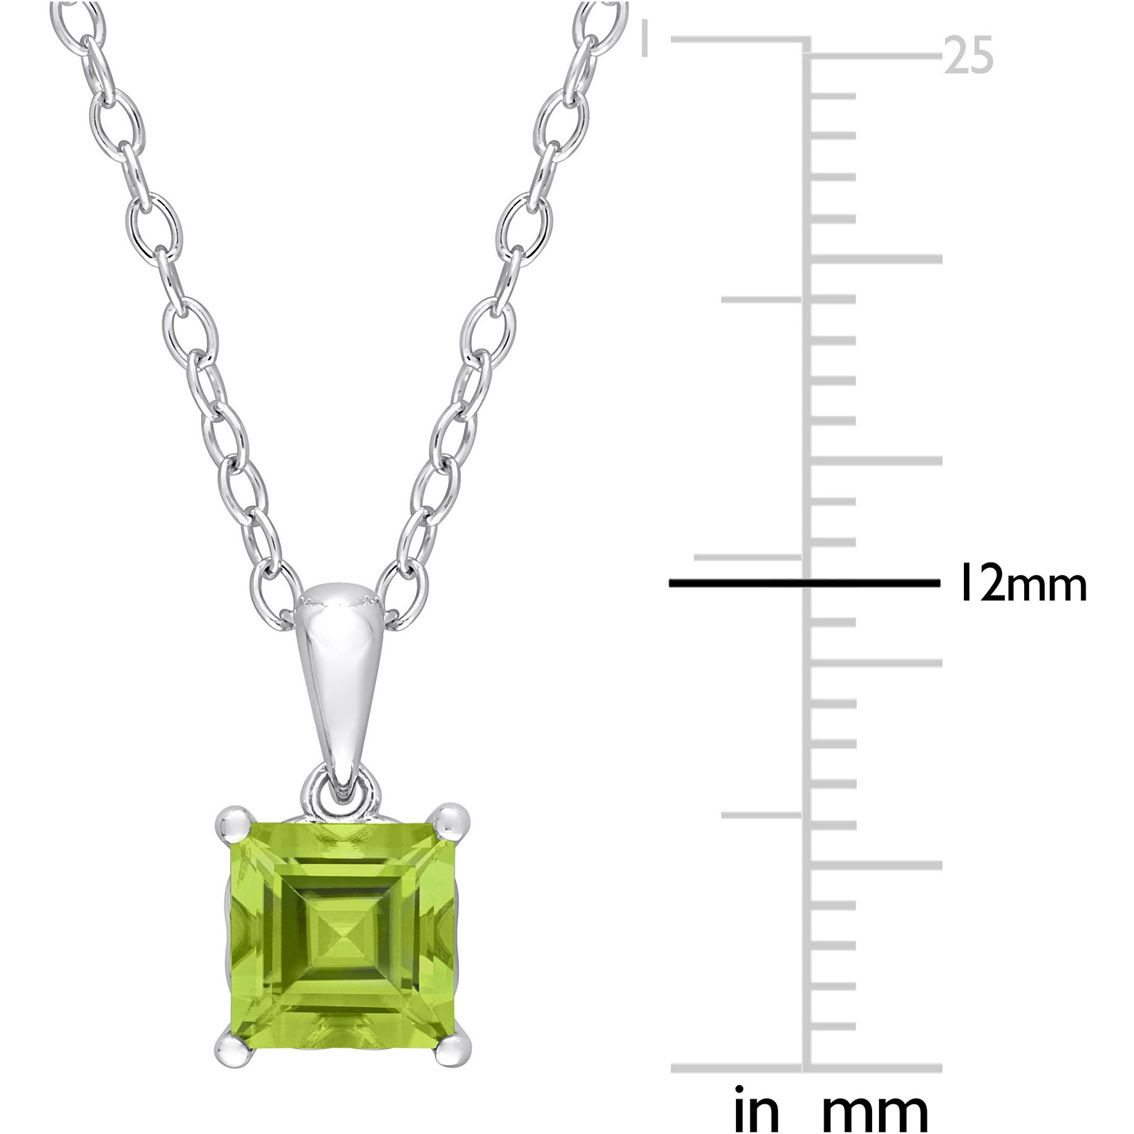 Sofia B. 2pc Set Princess Cut Peridot Solitaire Necklace & Earrings Sterling Silver - Image 2 of 4